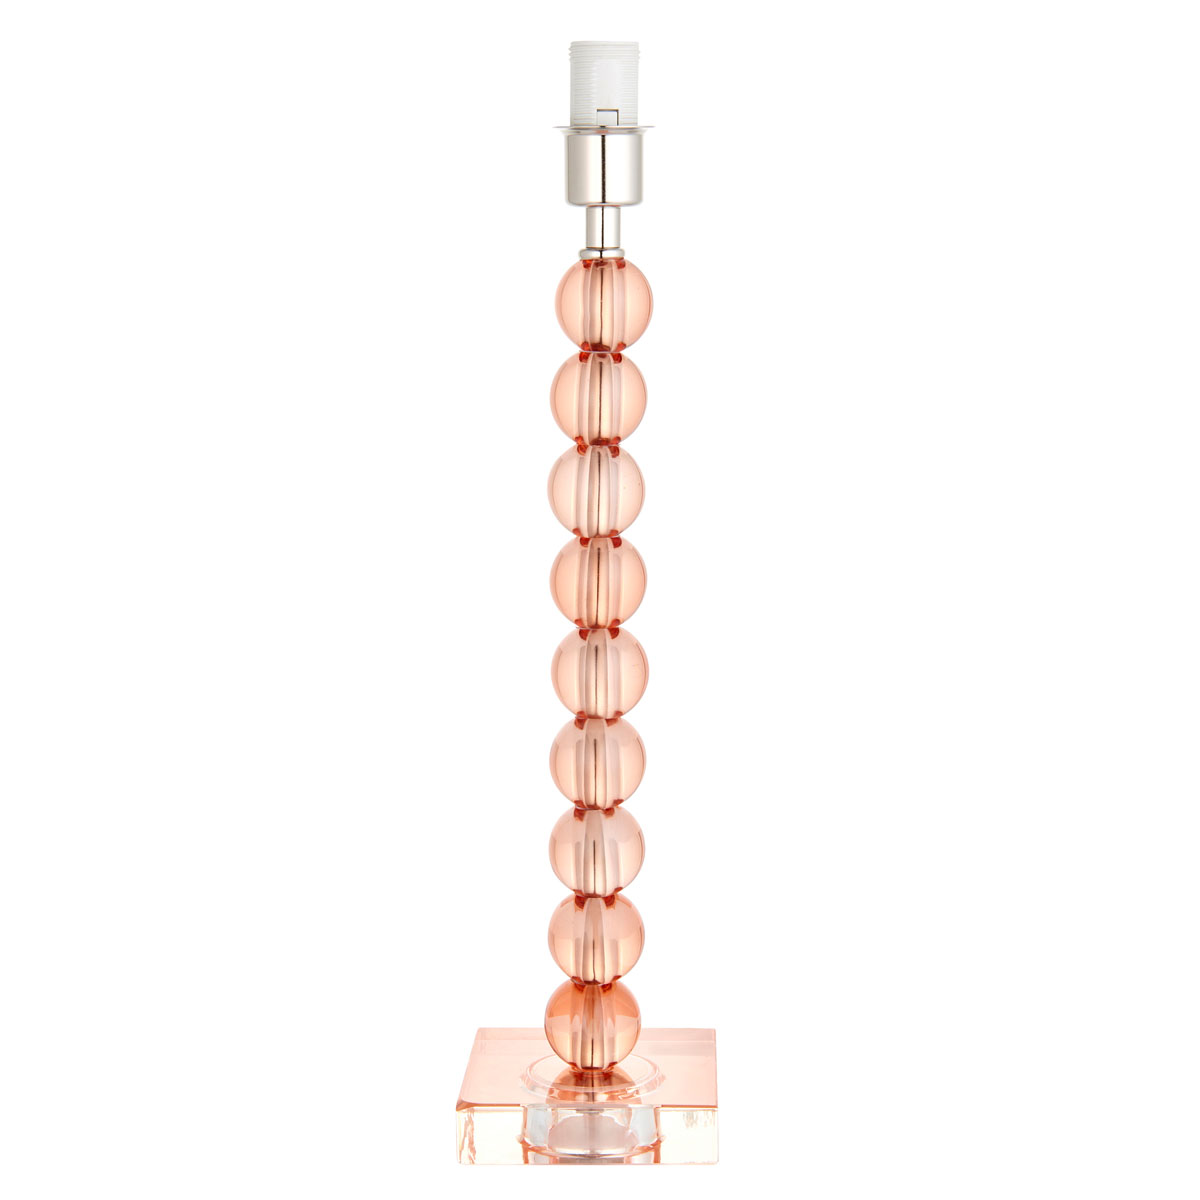 Adelie 1 Table Lamp Blush Tinted